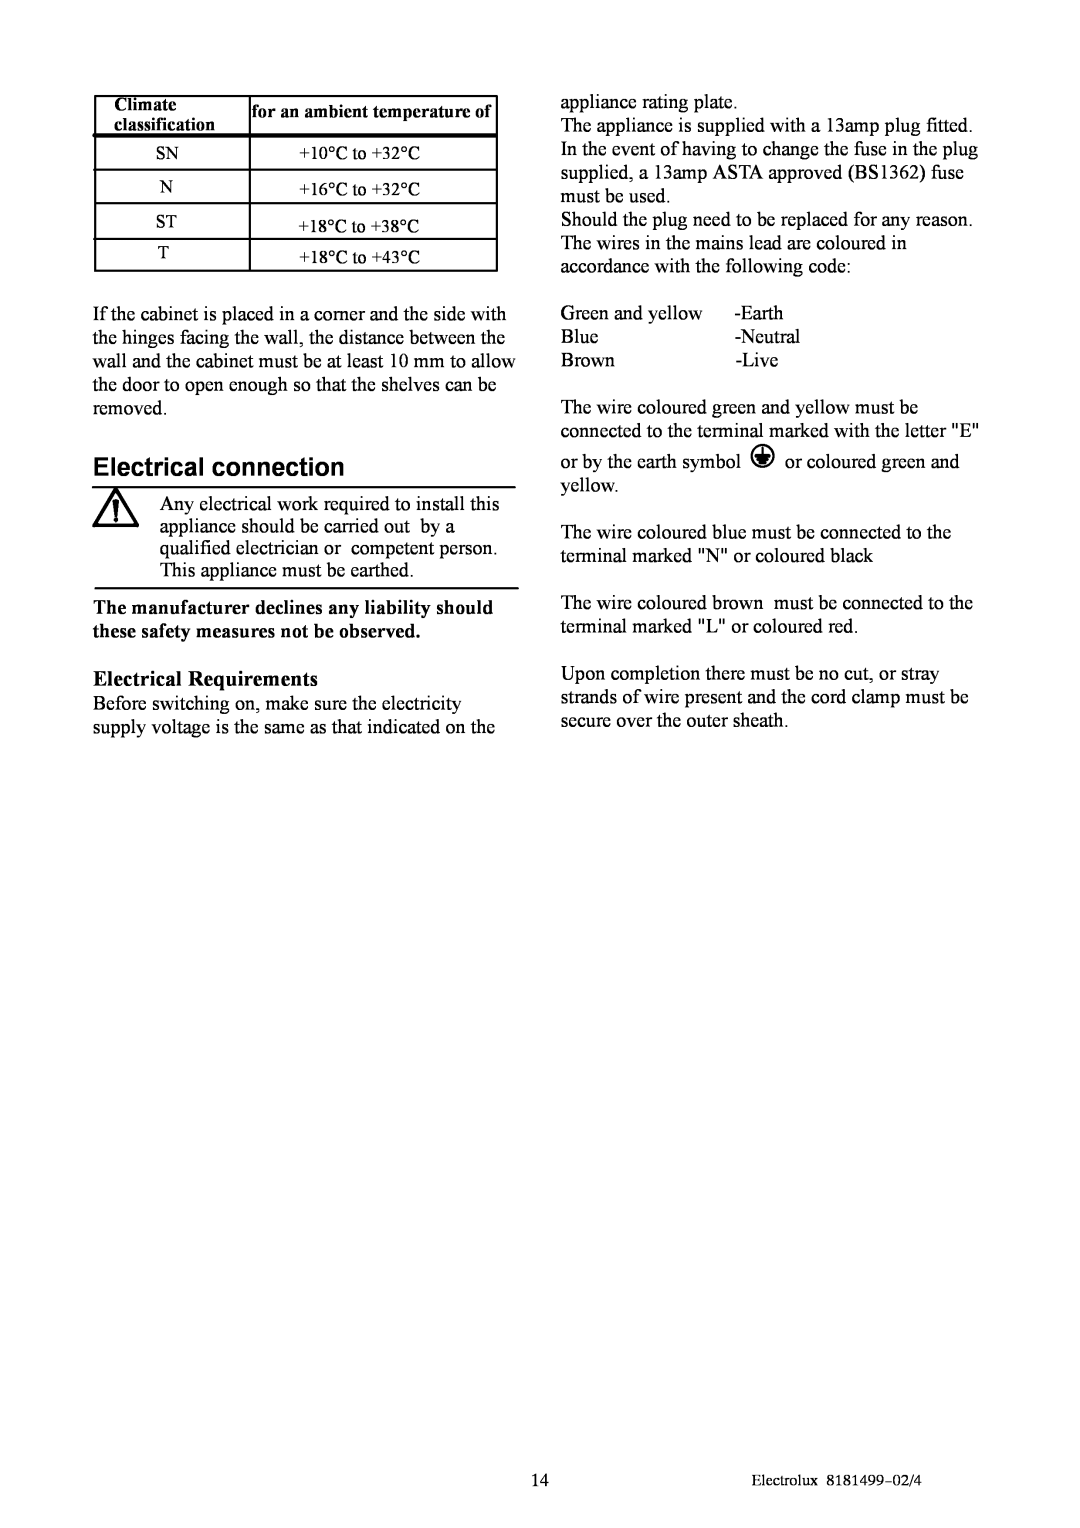 Electrolux EU8216C manual Electrical connection, Electrical Requirements 